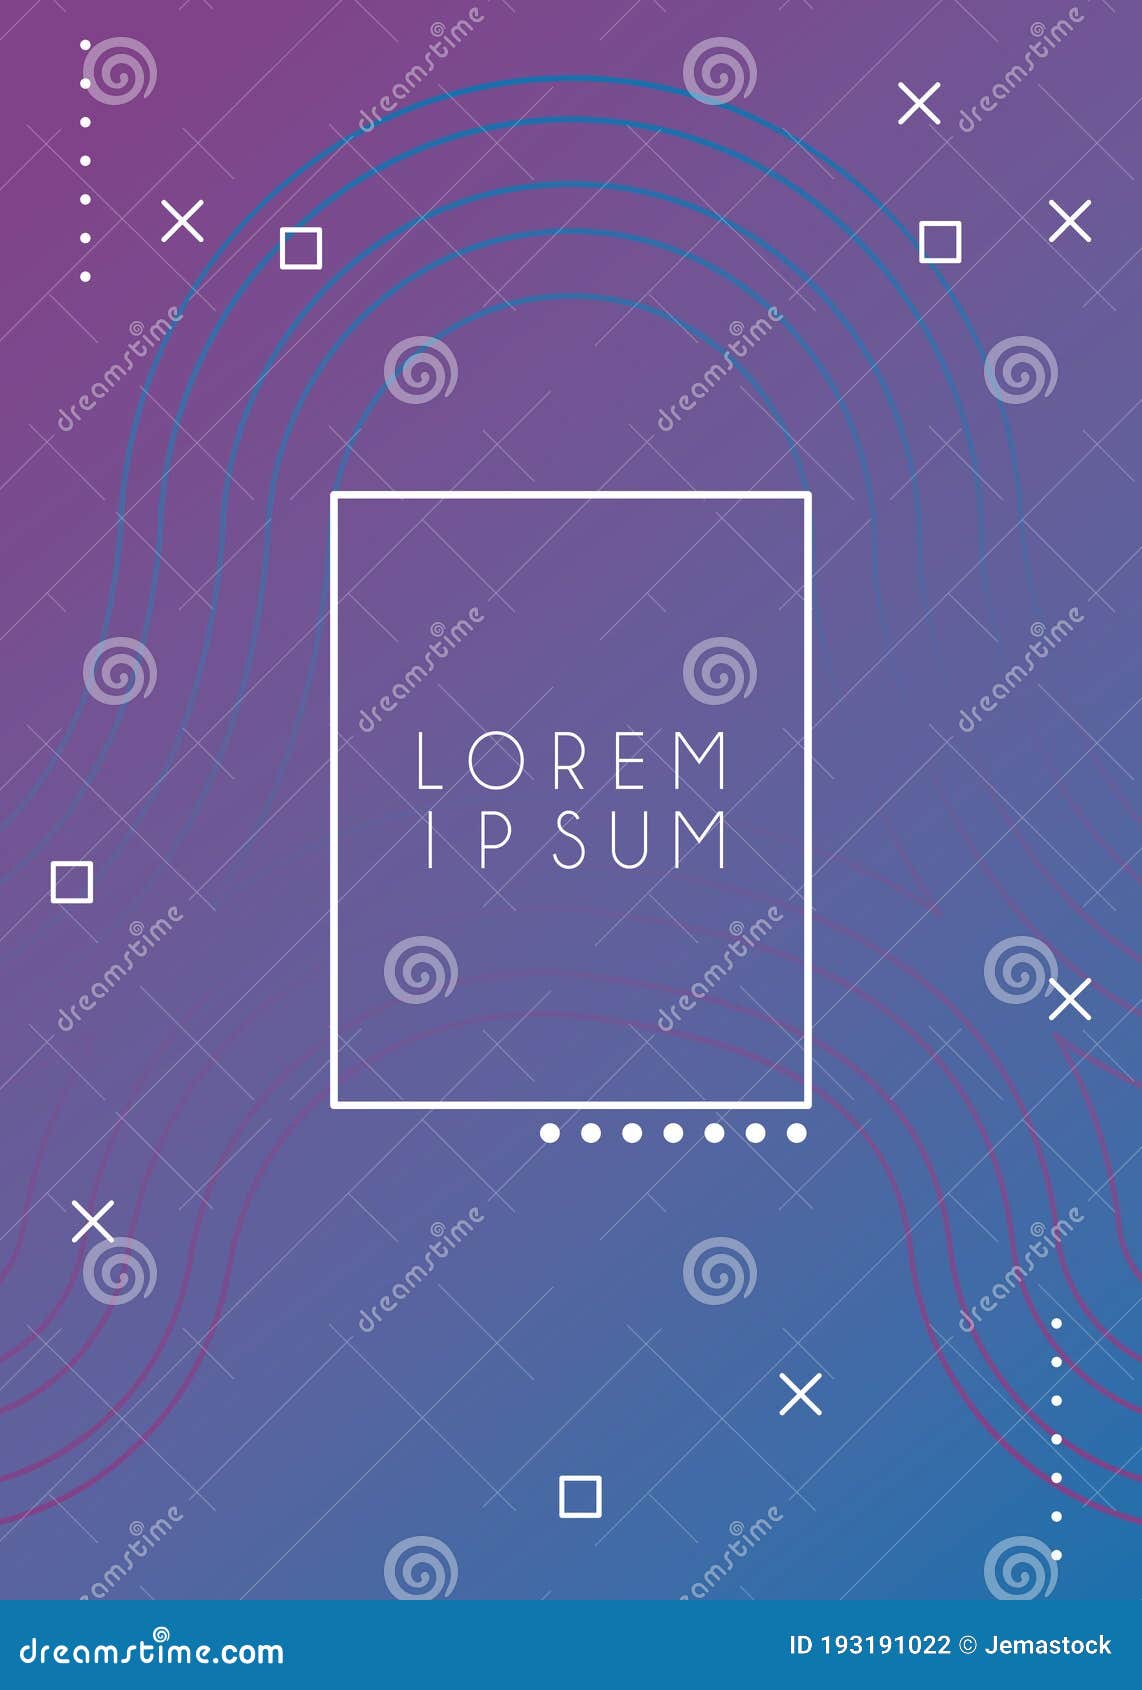 Vivid Paint Purple Color with Square Frame Background Stock Vector ...